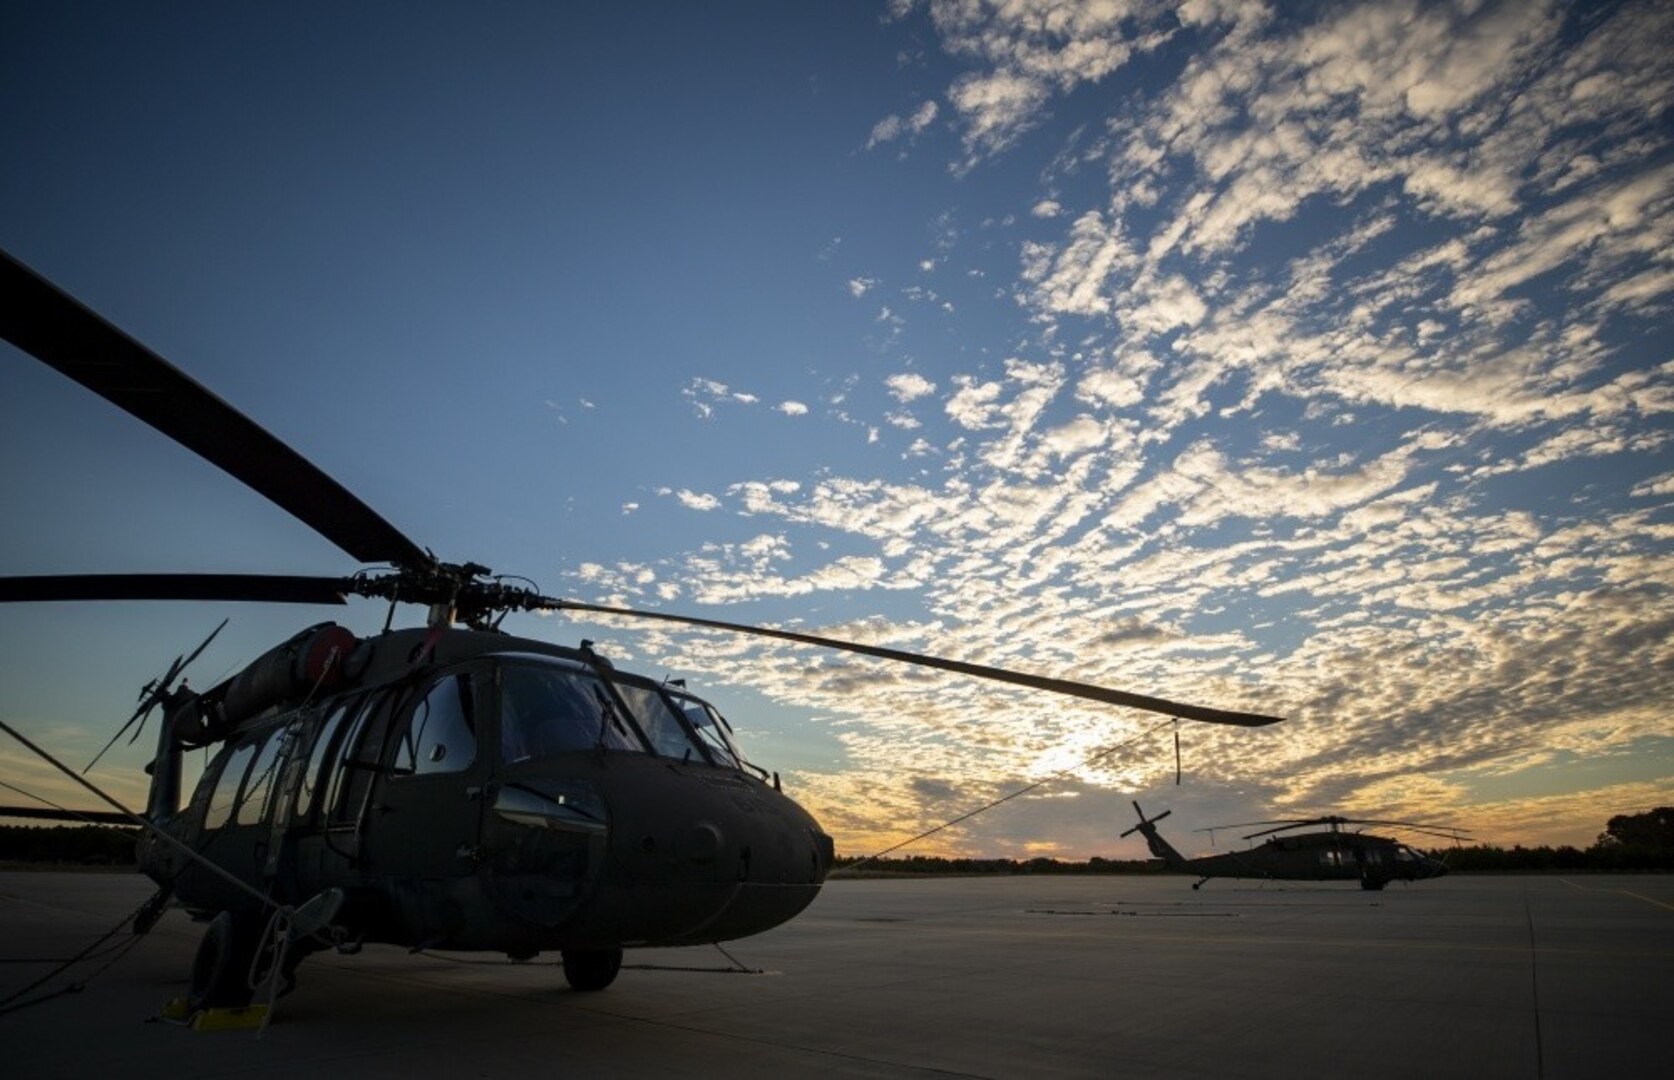 U.S. Army UH-60L Black Hawk helicopters from the New Jersey National Guard’s 1-150th Assault Helicopter Battalion sit on the flight line during sunset at the Army Aviation Support Facility, Joint Base McGuire-Dix-Lakehurst, N.J., Nov. 8, 2018.